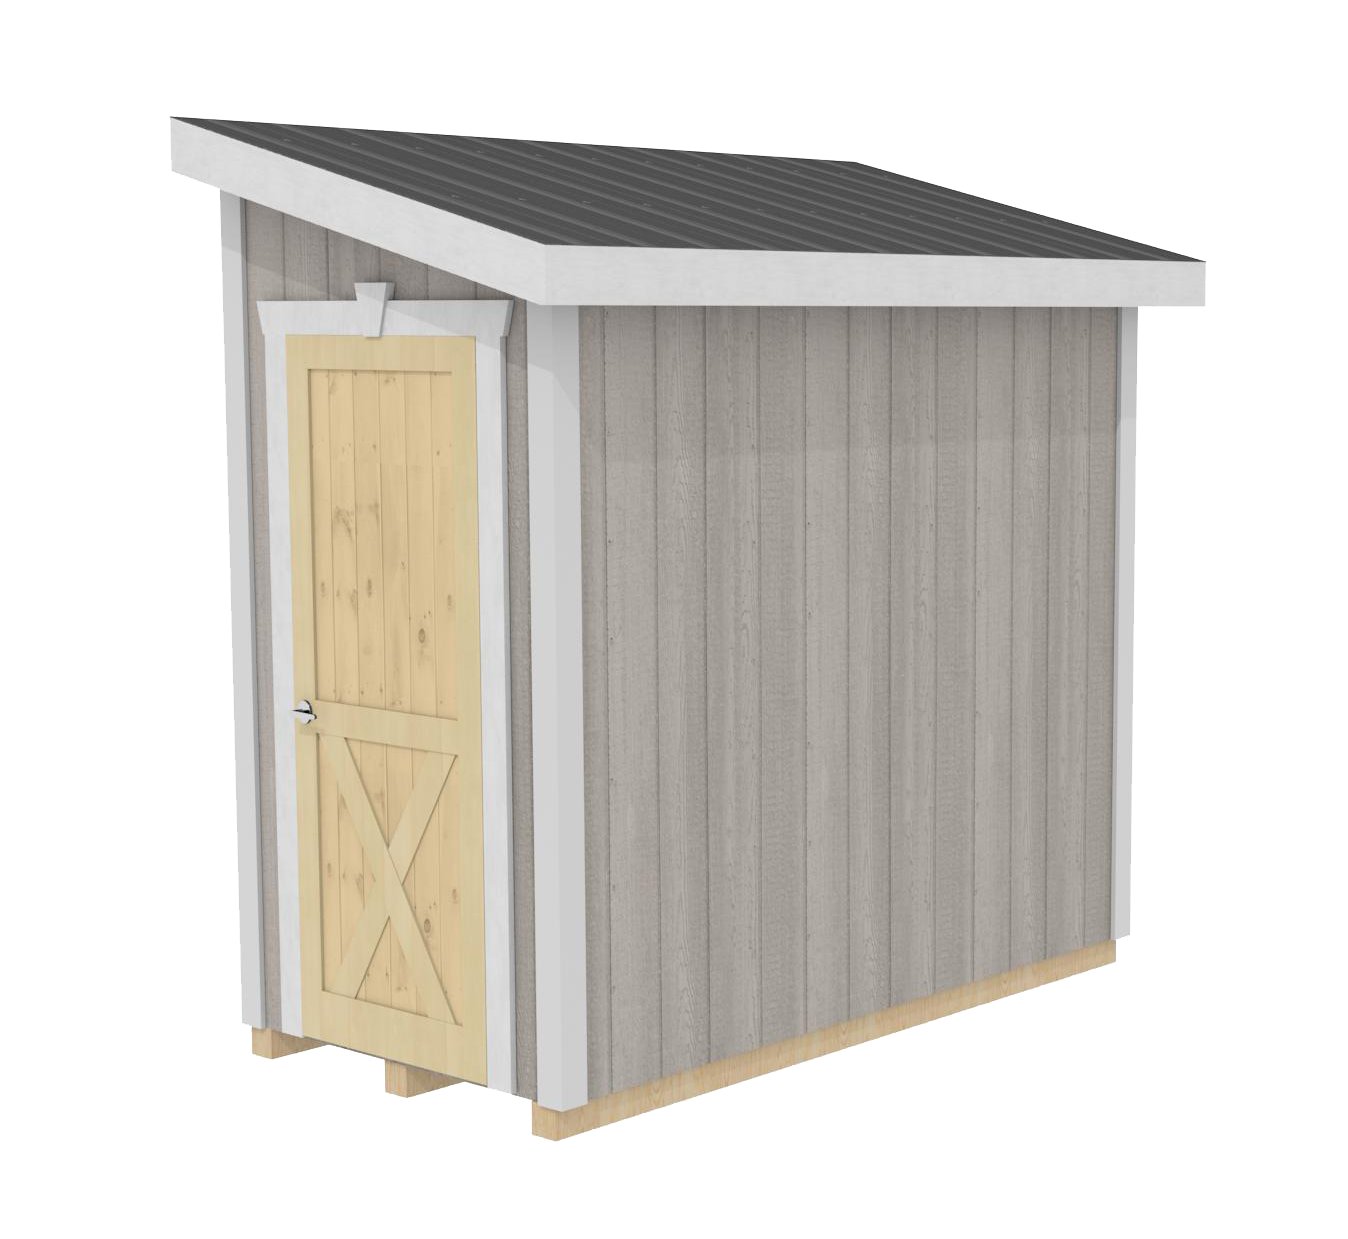 Shed Addition Standard Product.png__PID:53488ee4-337b-4190-9a9b-51e280e80e4d